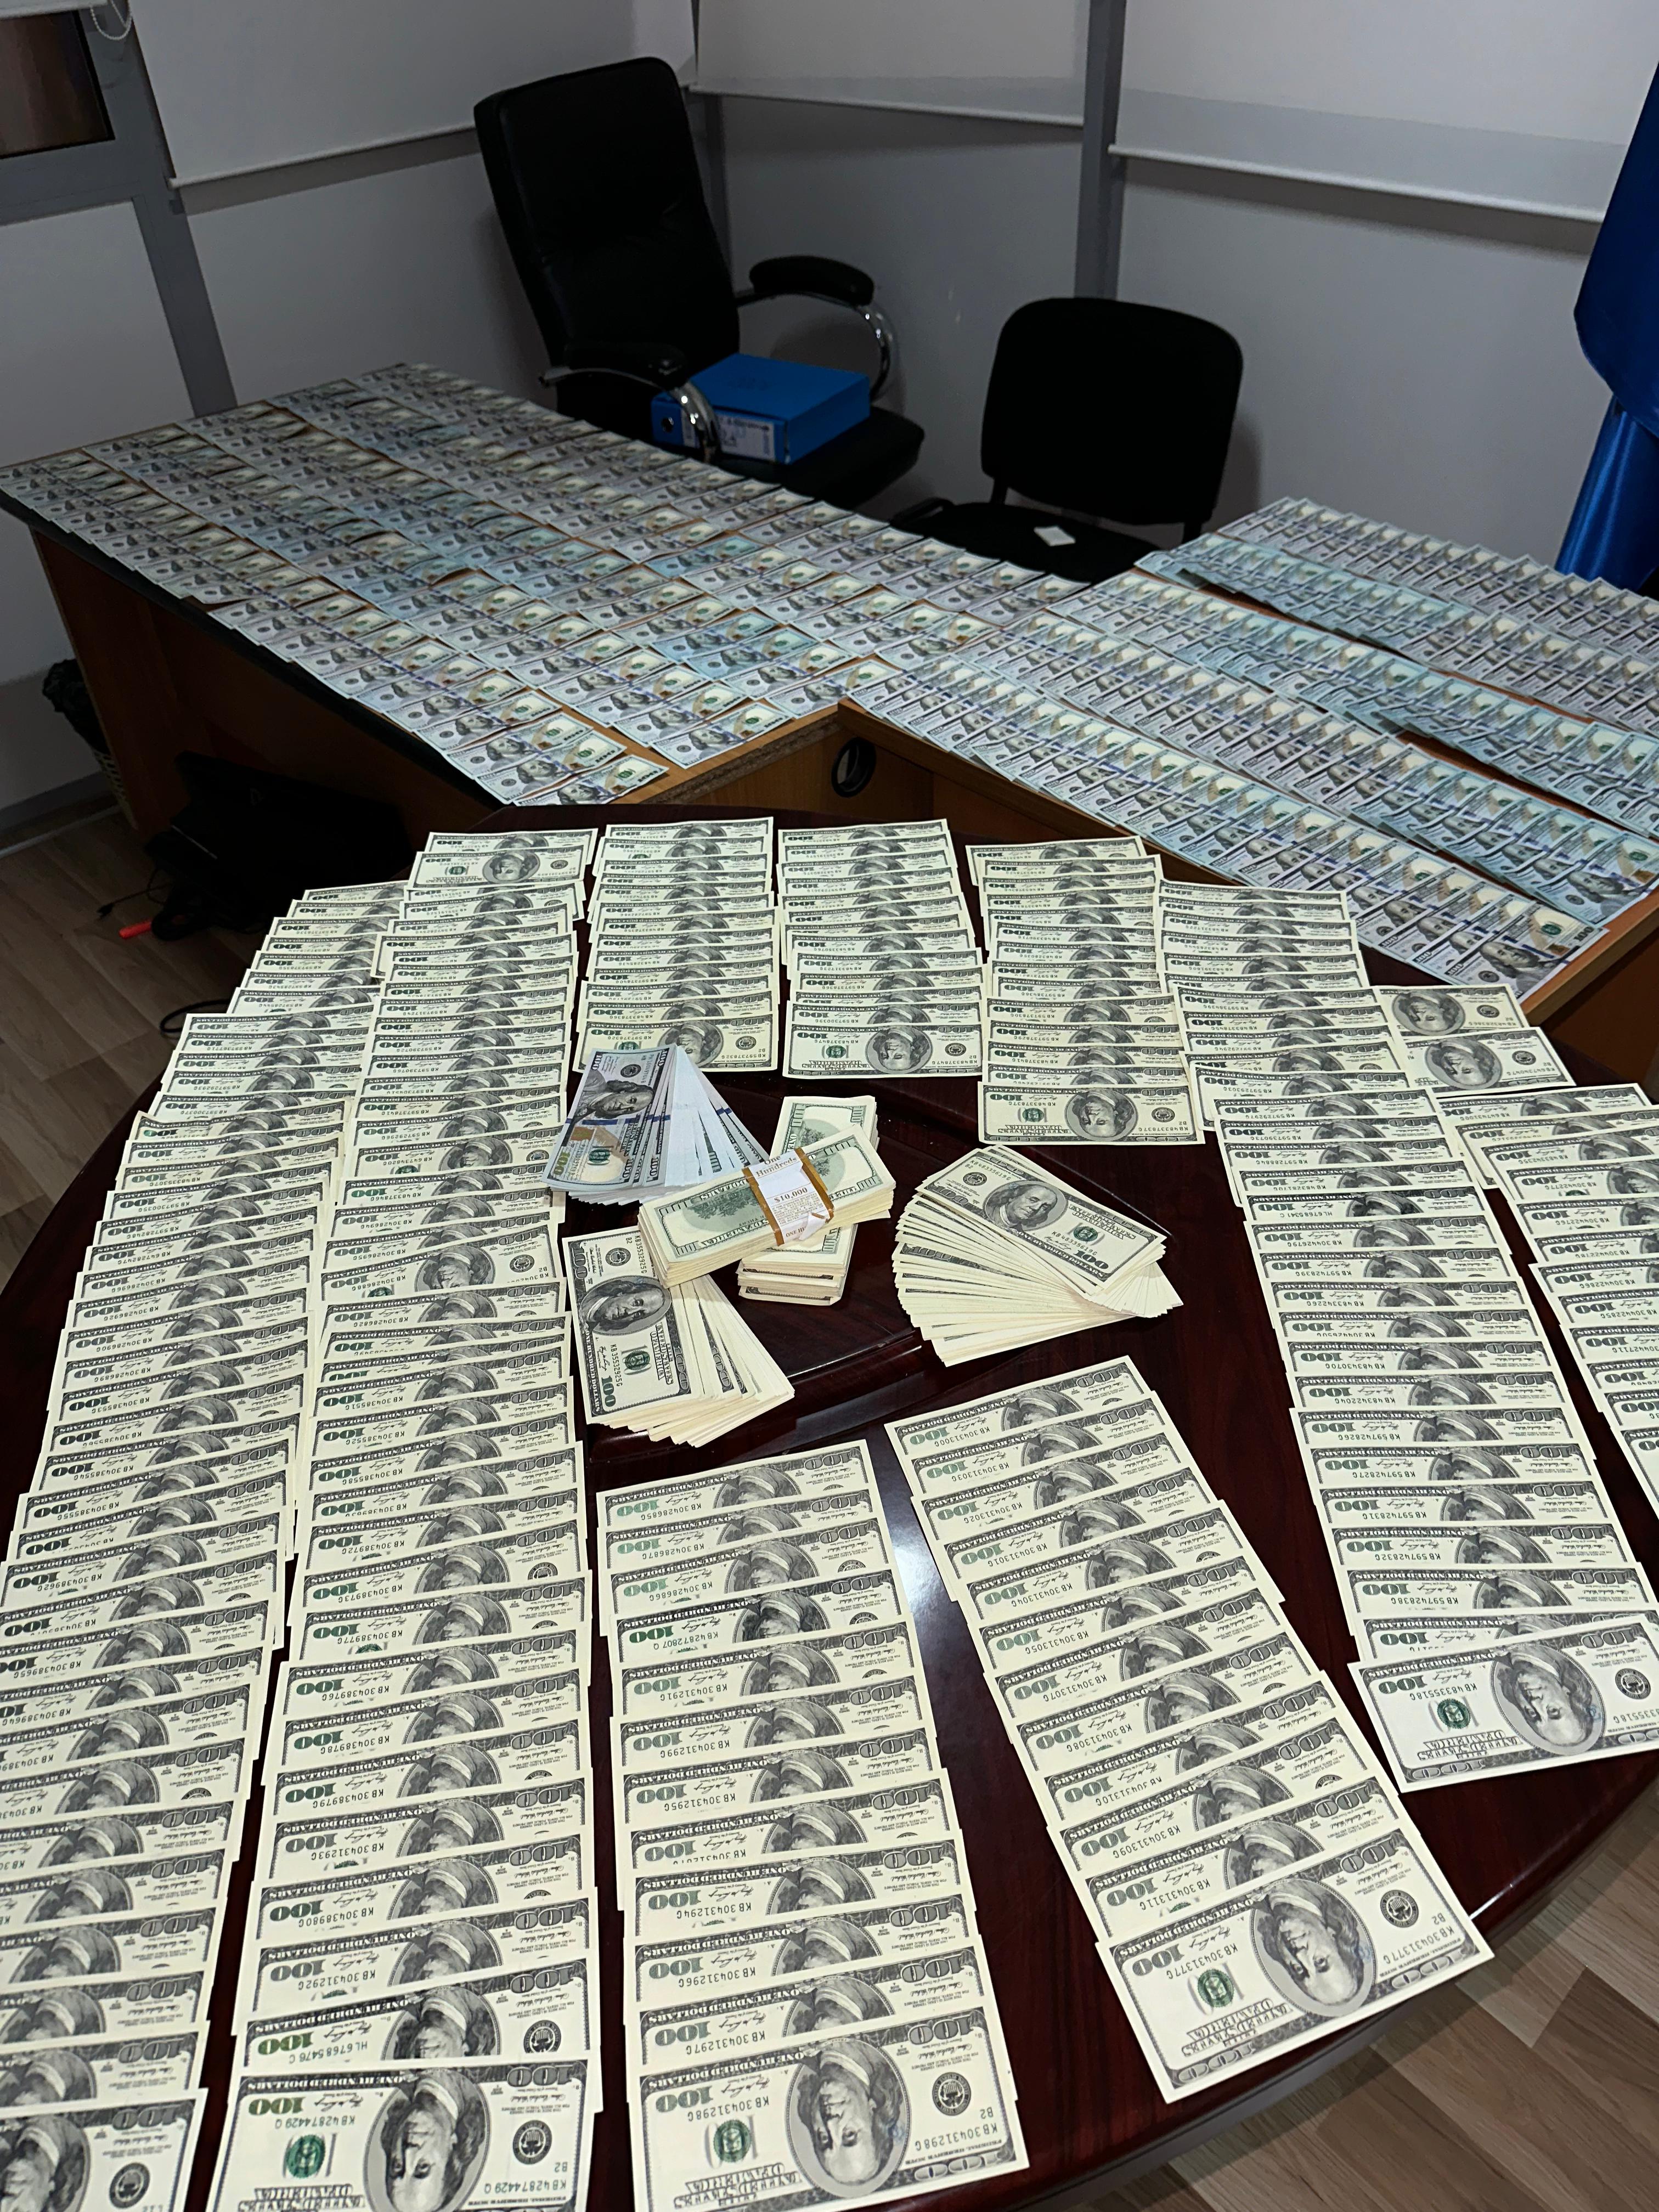 A person is arrested for counterfeiting money